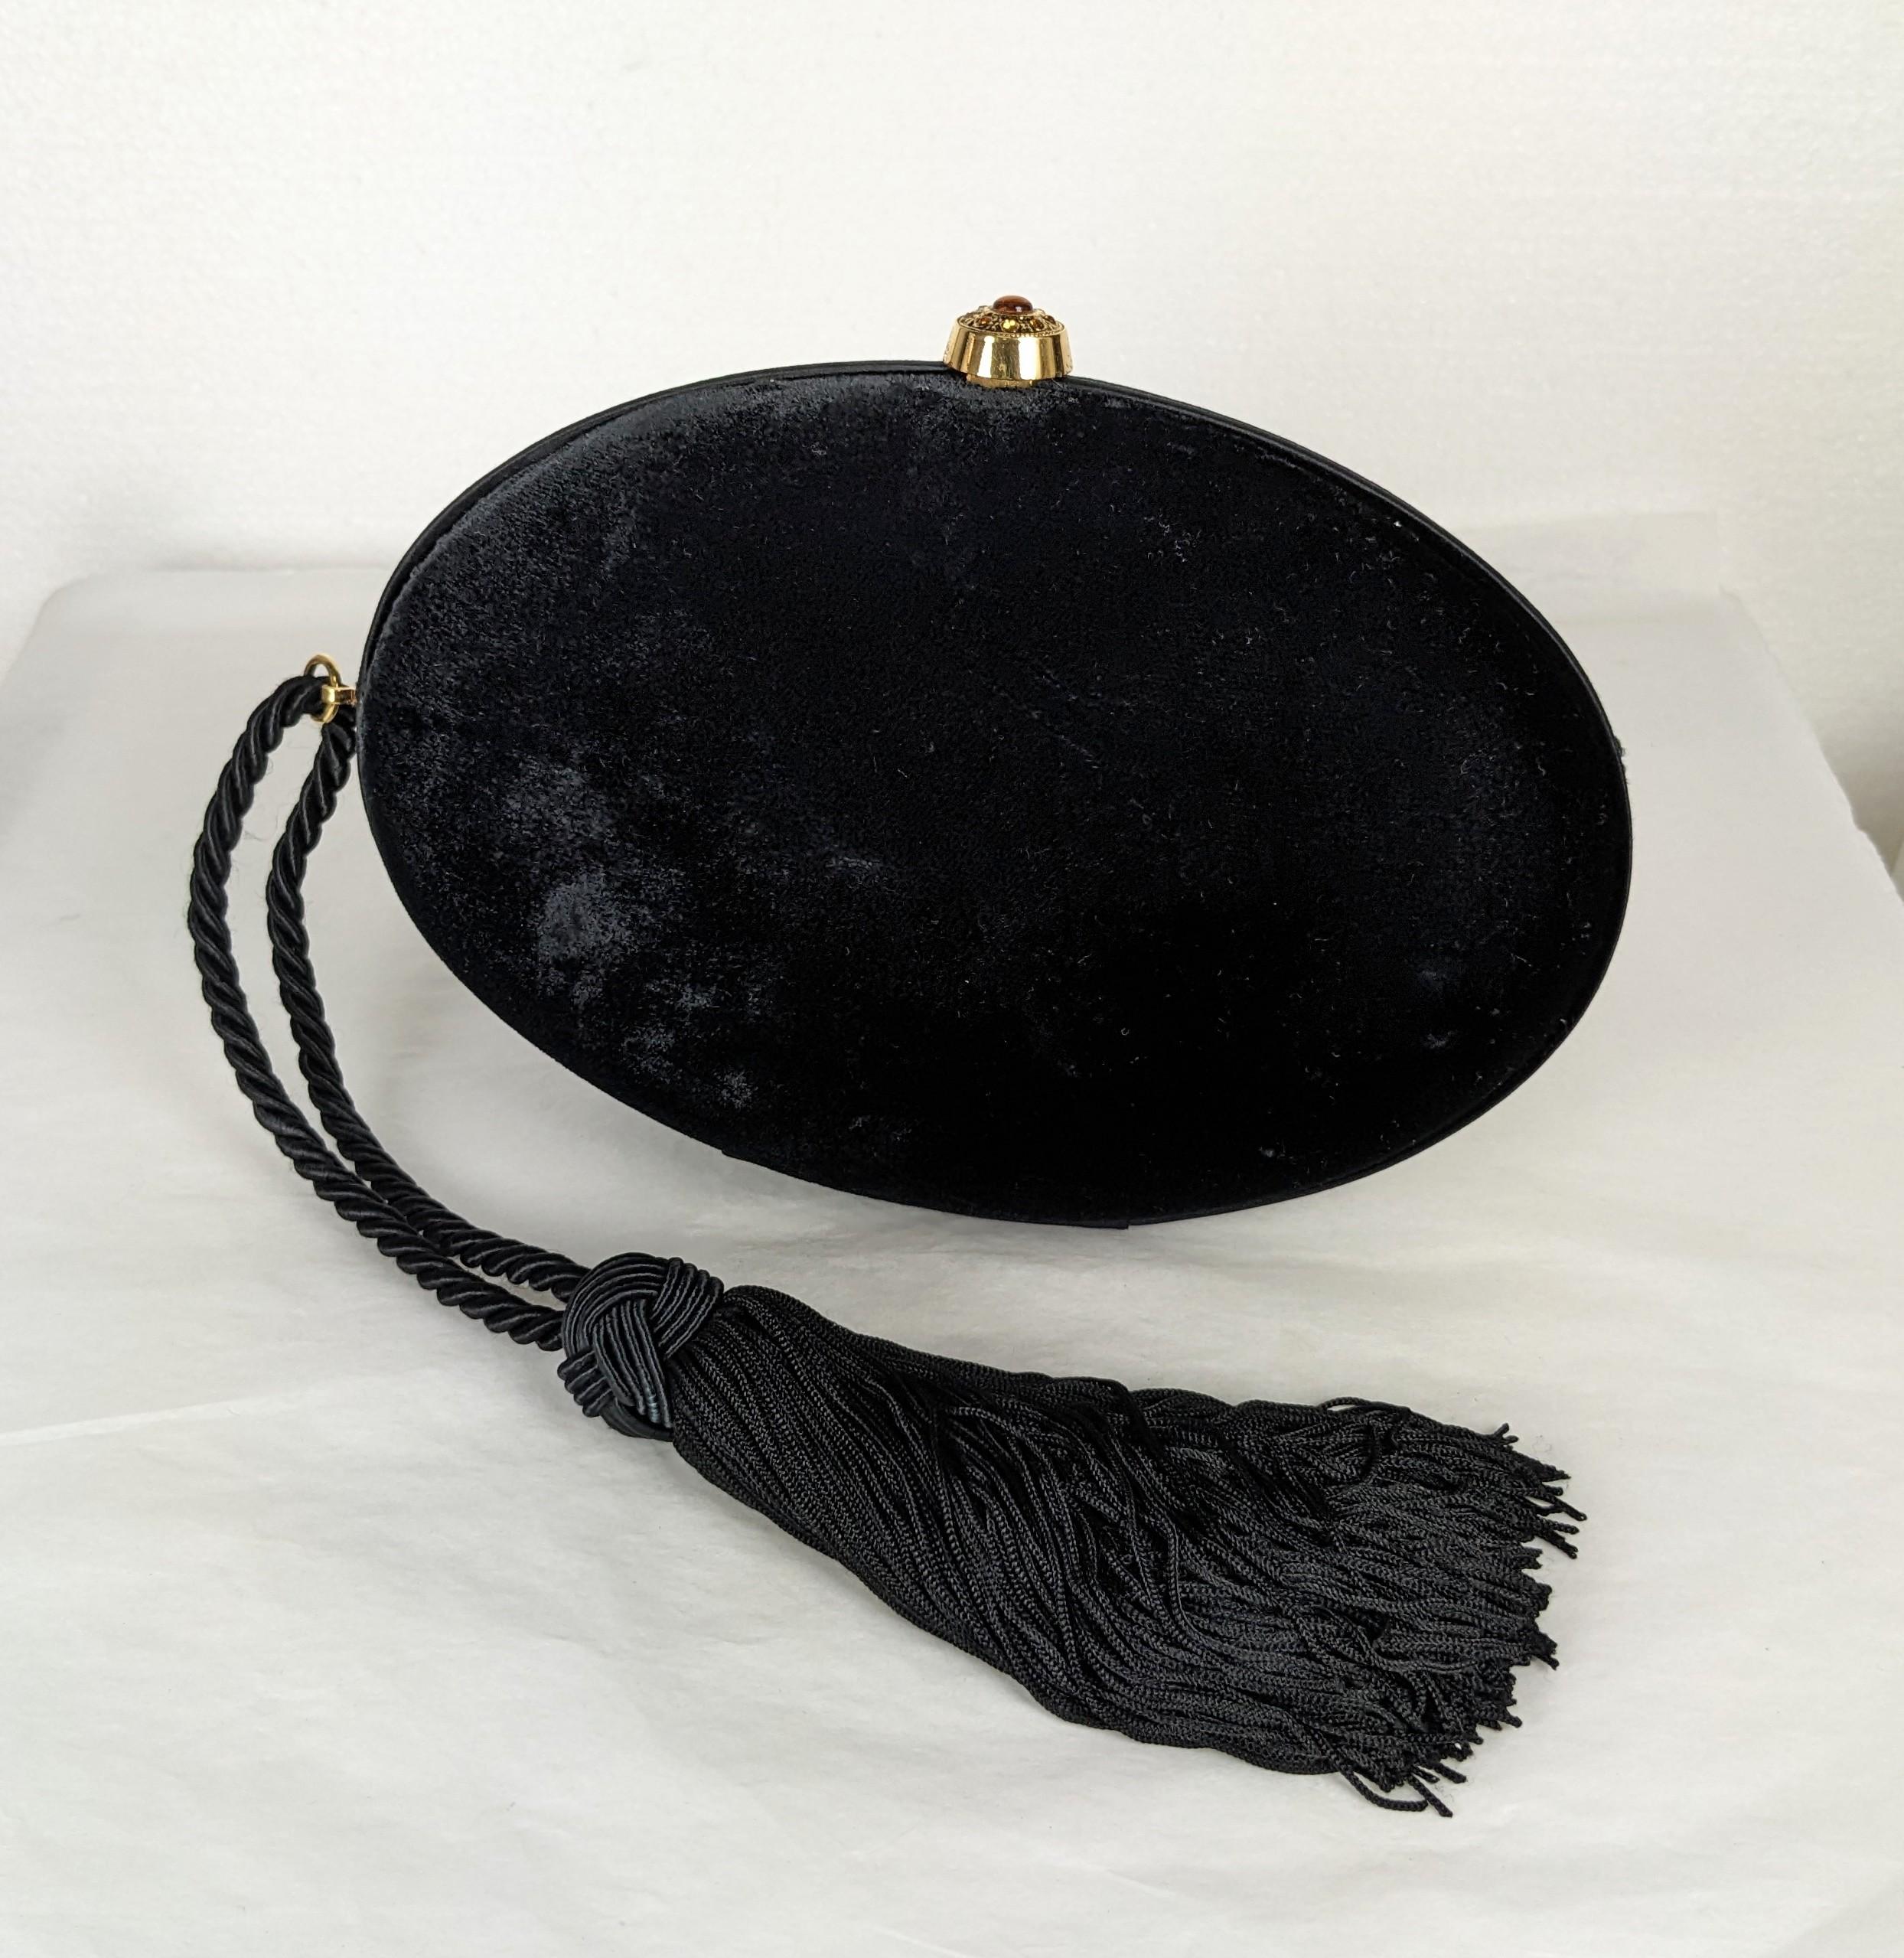 Elegant Ralph Lauren Velvet Minaudiere with silk tassel cord. Egg shaped with soutache trimmed interior and citrine paste set clasp. Silk cord and tassel handle. 2000's Italy. 8